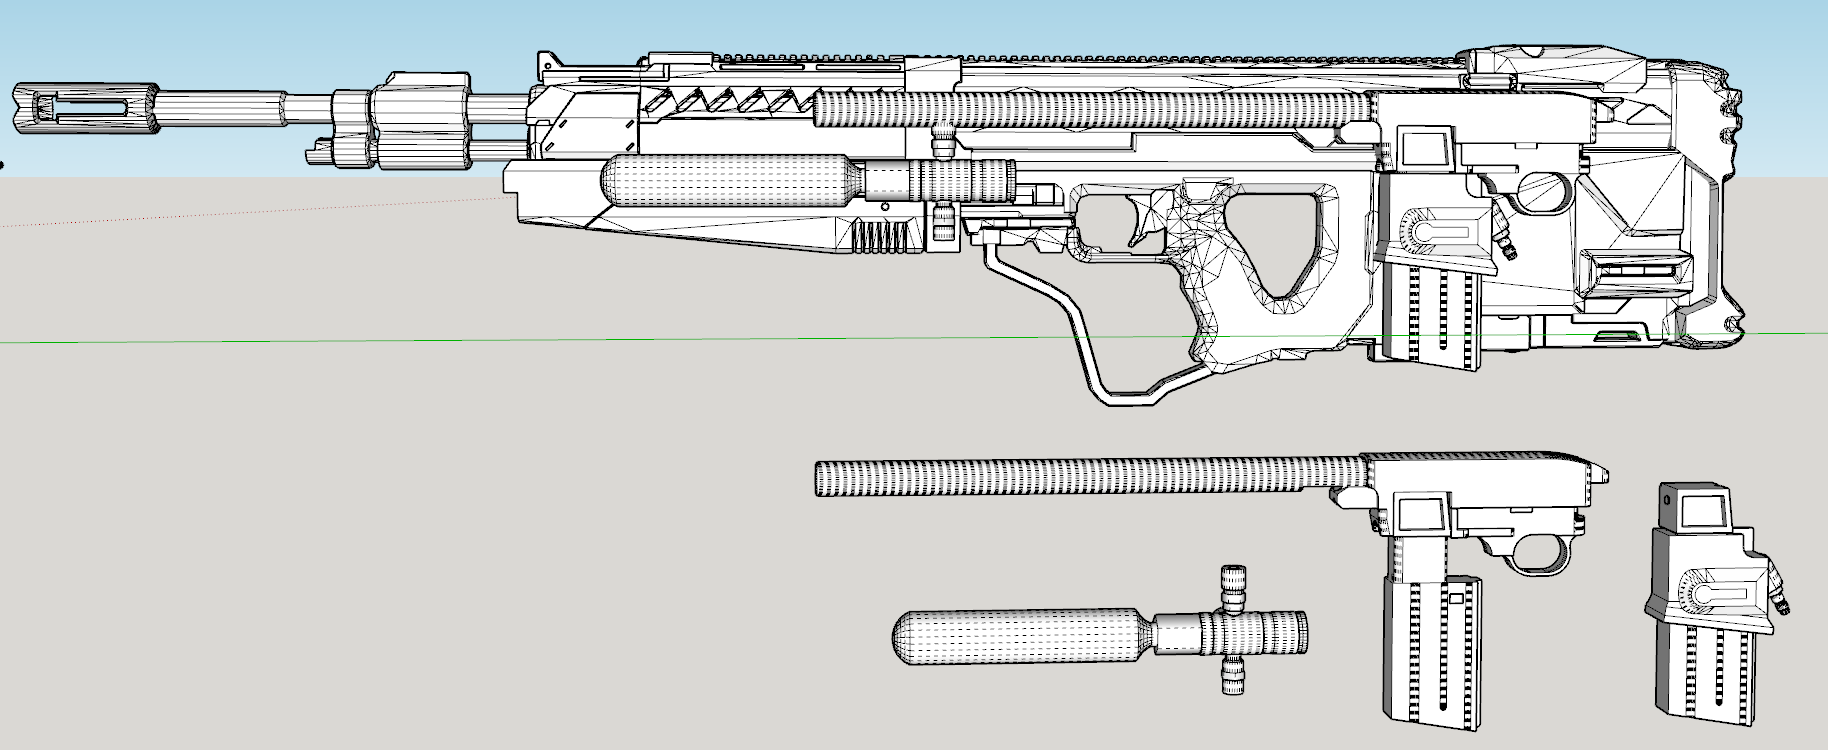 CAD Layout.png